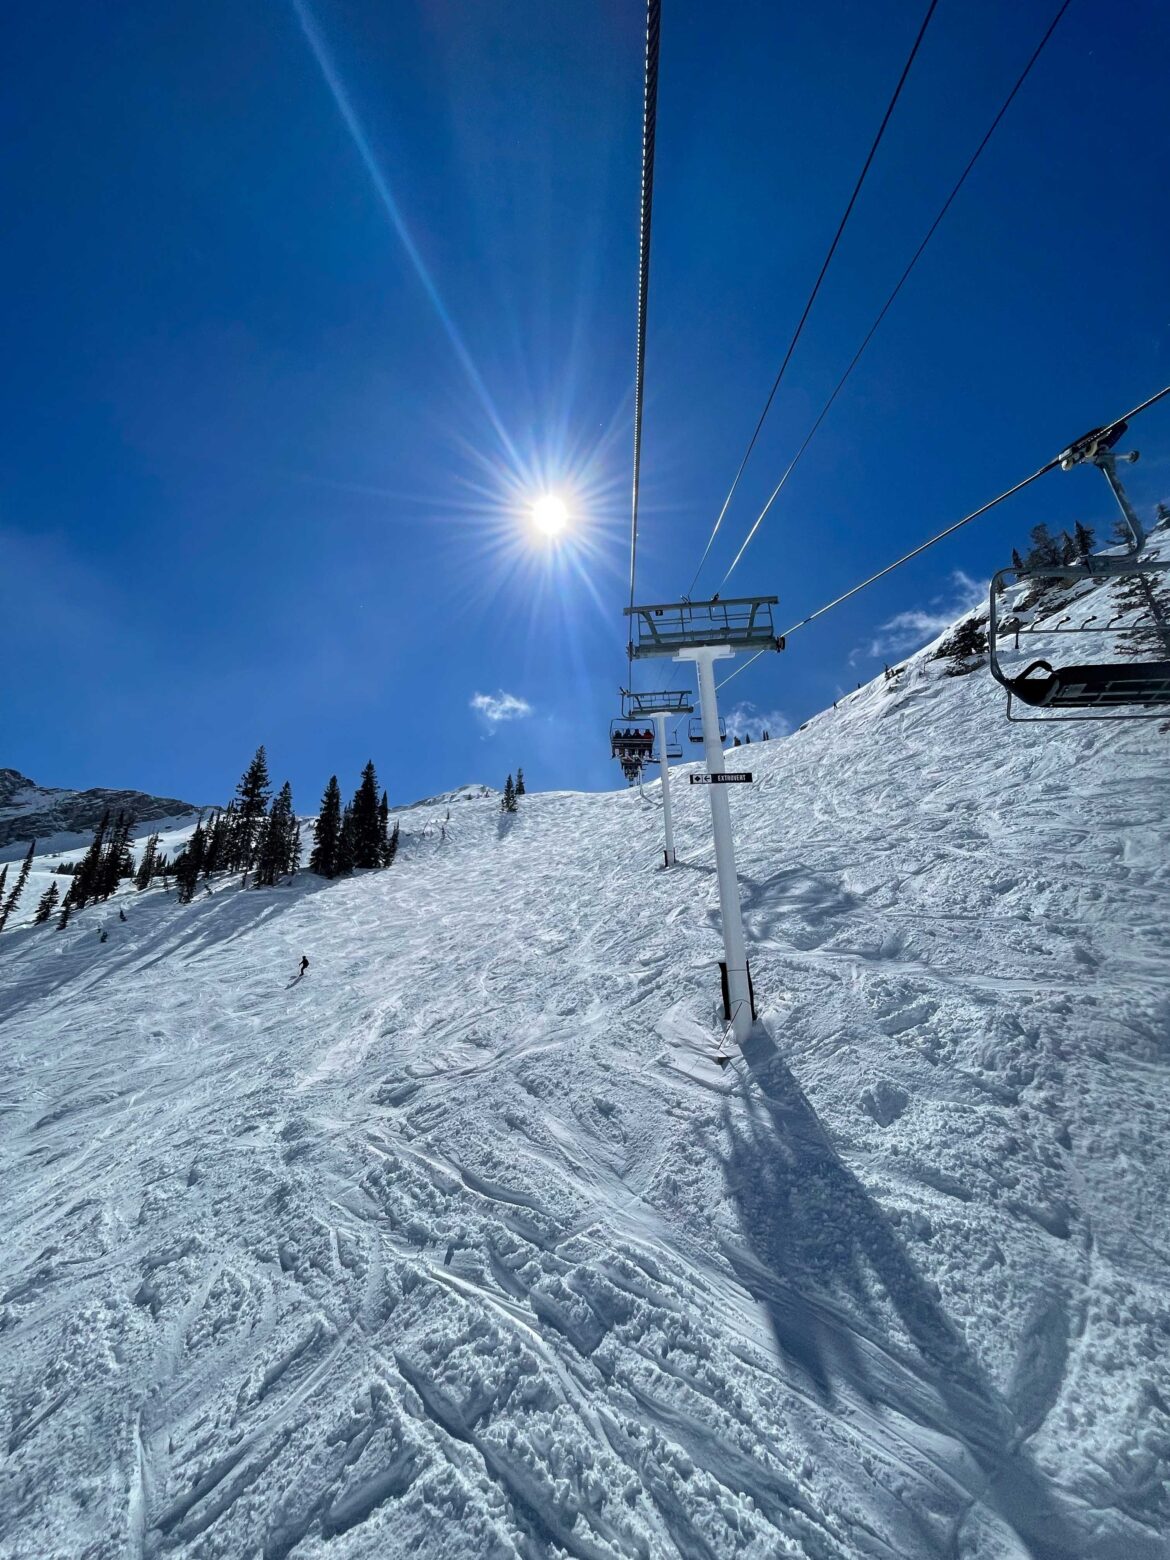 Rising costs of climate change threaten to make skiing a less